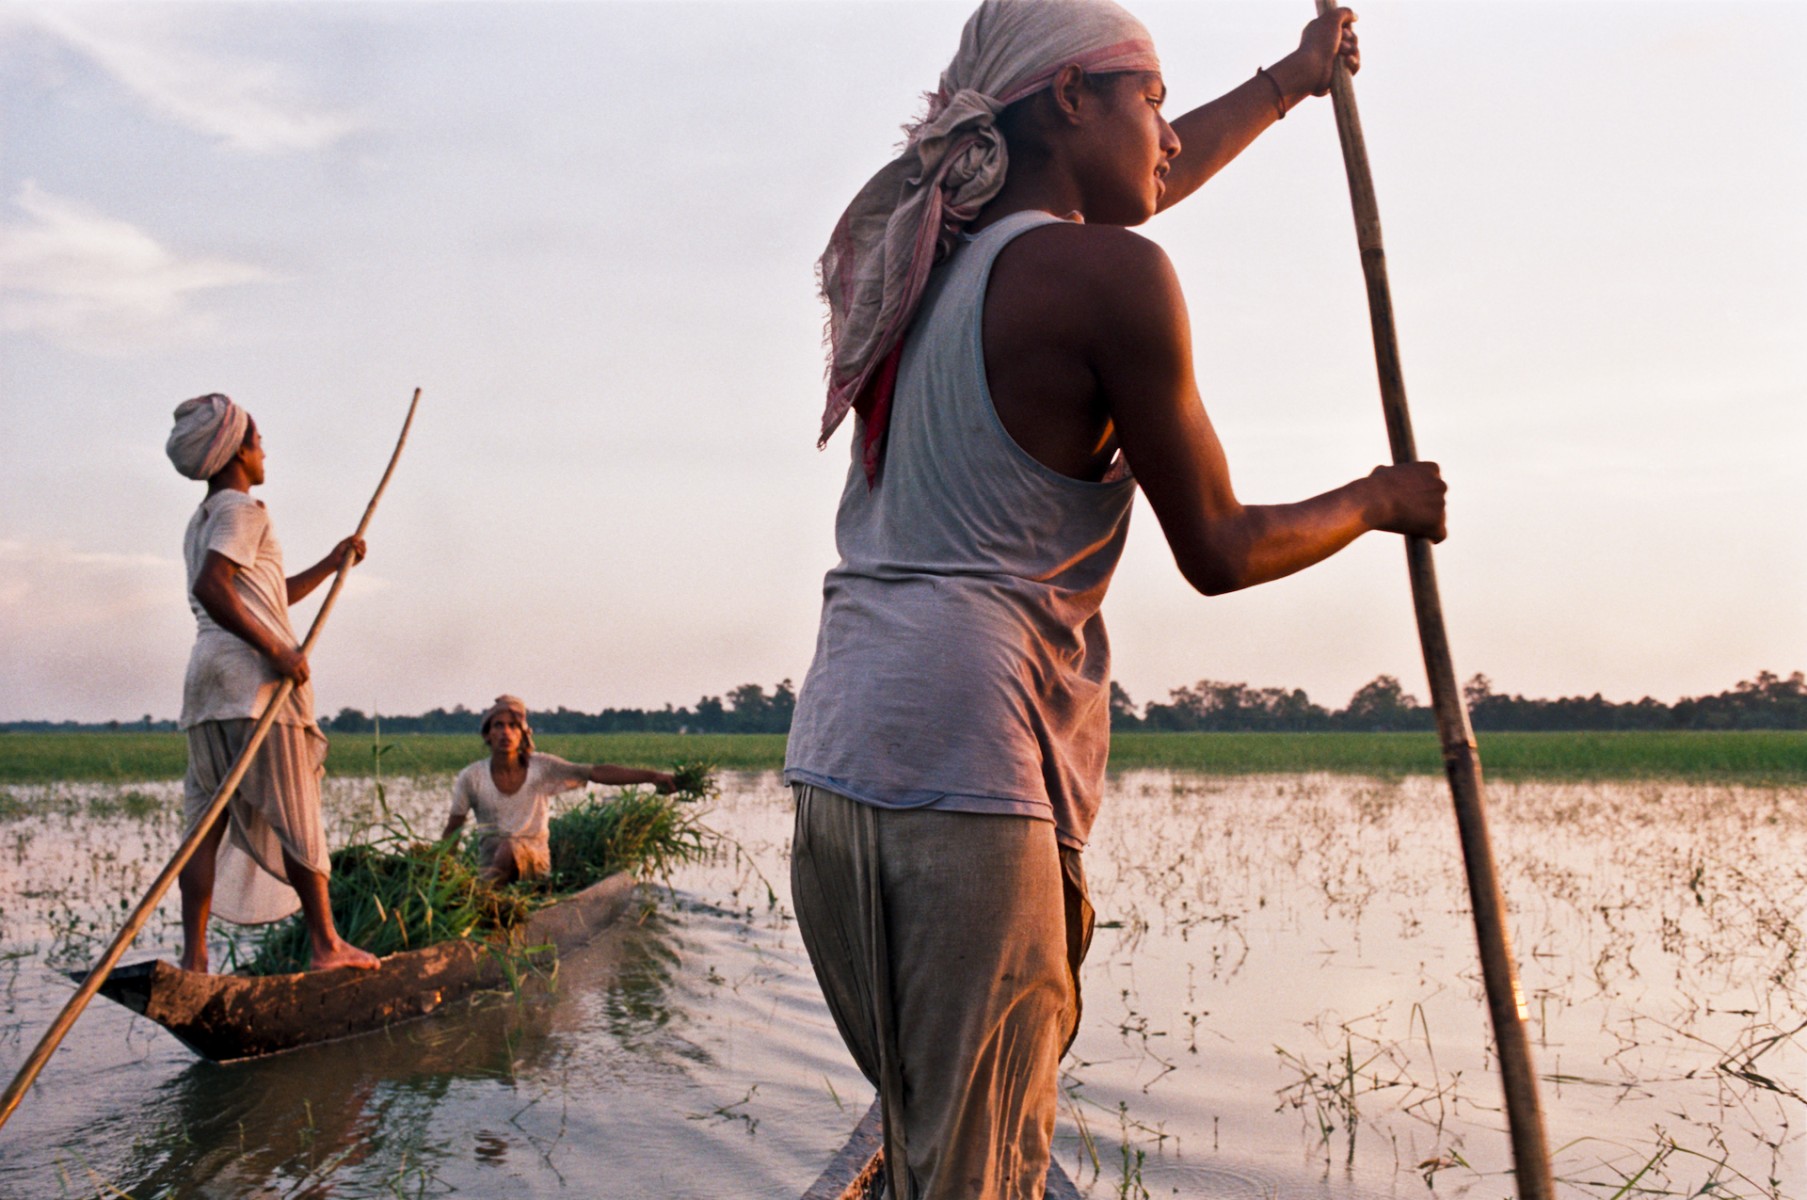 Returning with grass in boats, Majuli